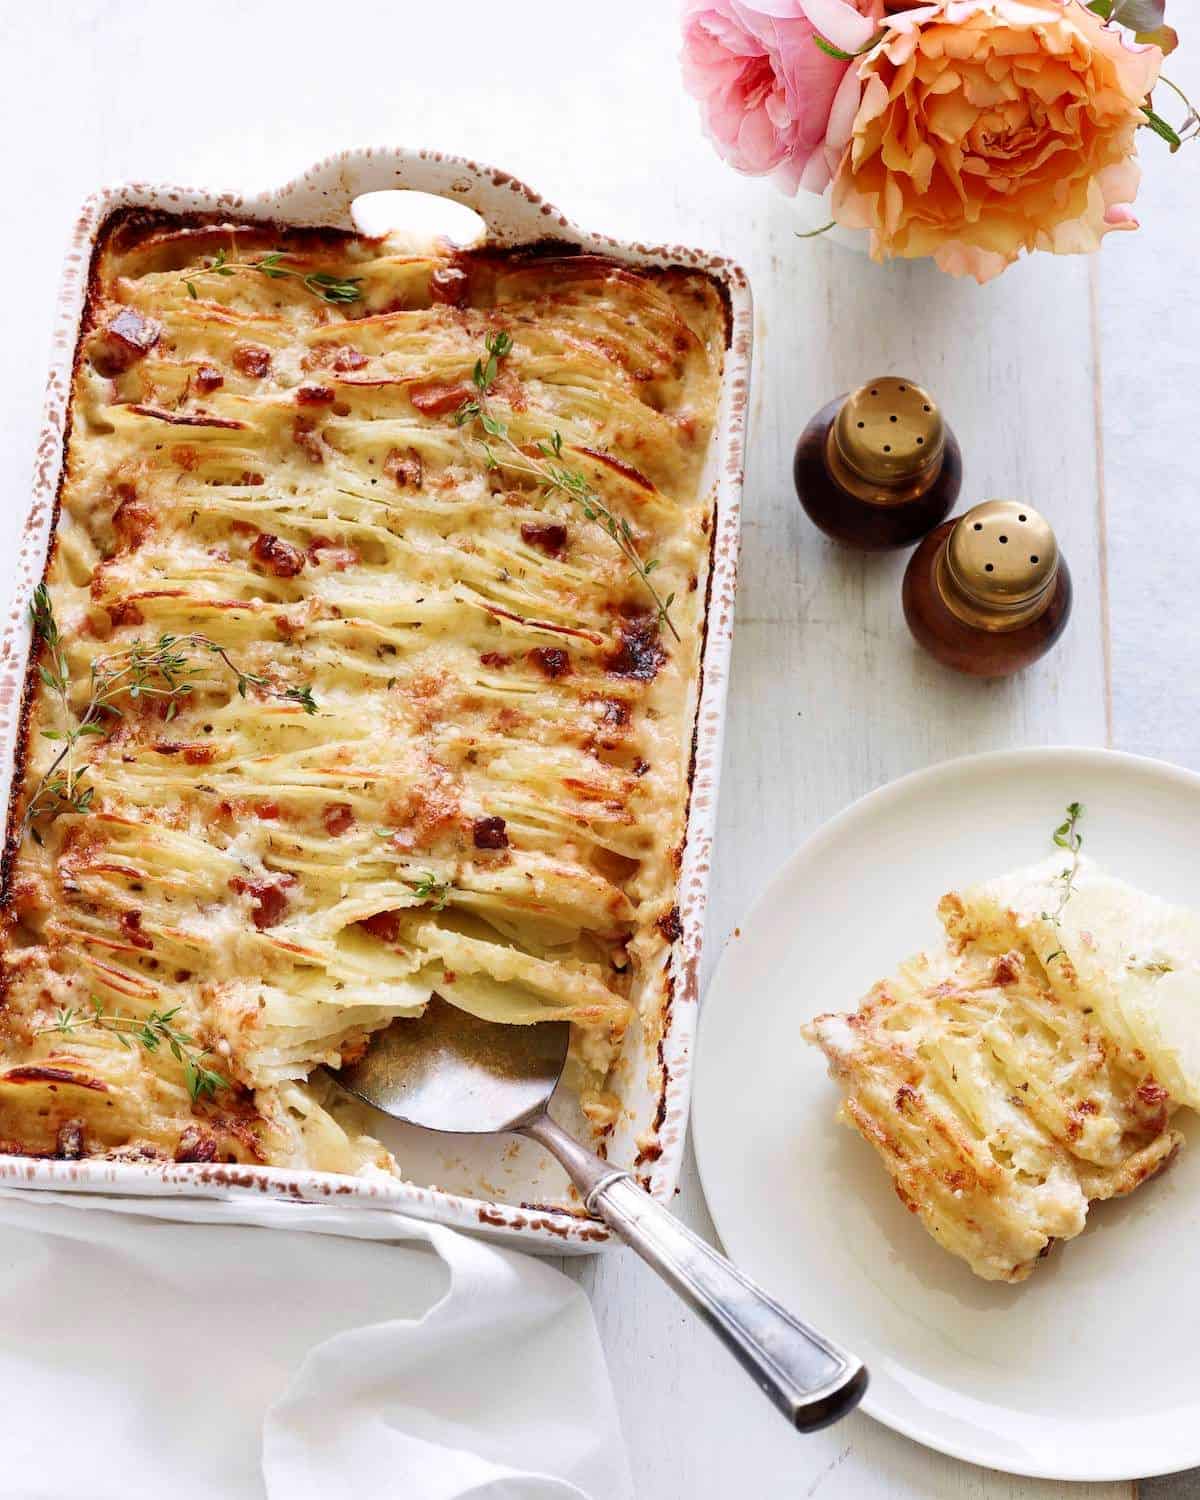 A rectangle white baking dish with hasselback scalloped potatoes baked dish with a flat spoon to serve, and a corner piece served into a white plate on the side, along with some flowers in a vase and salt and pepper shakers on the side.